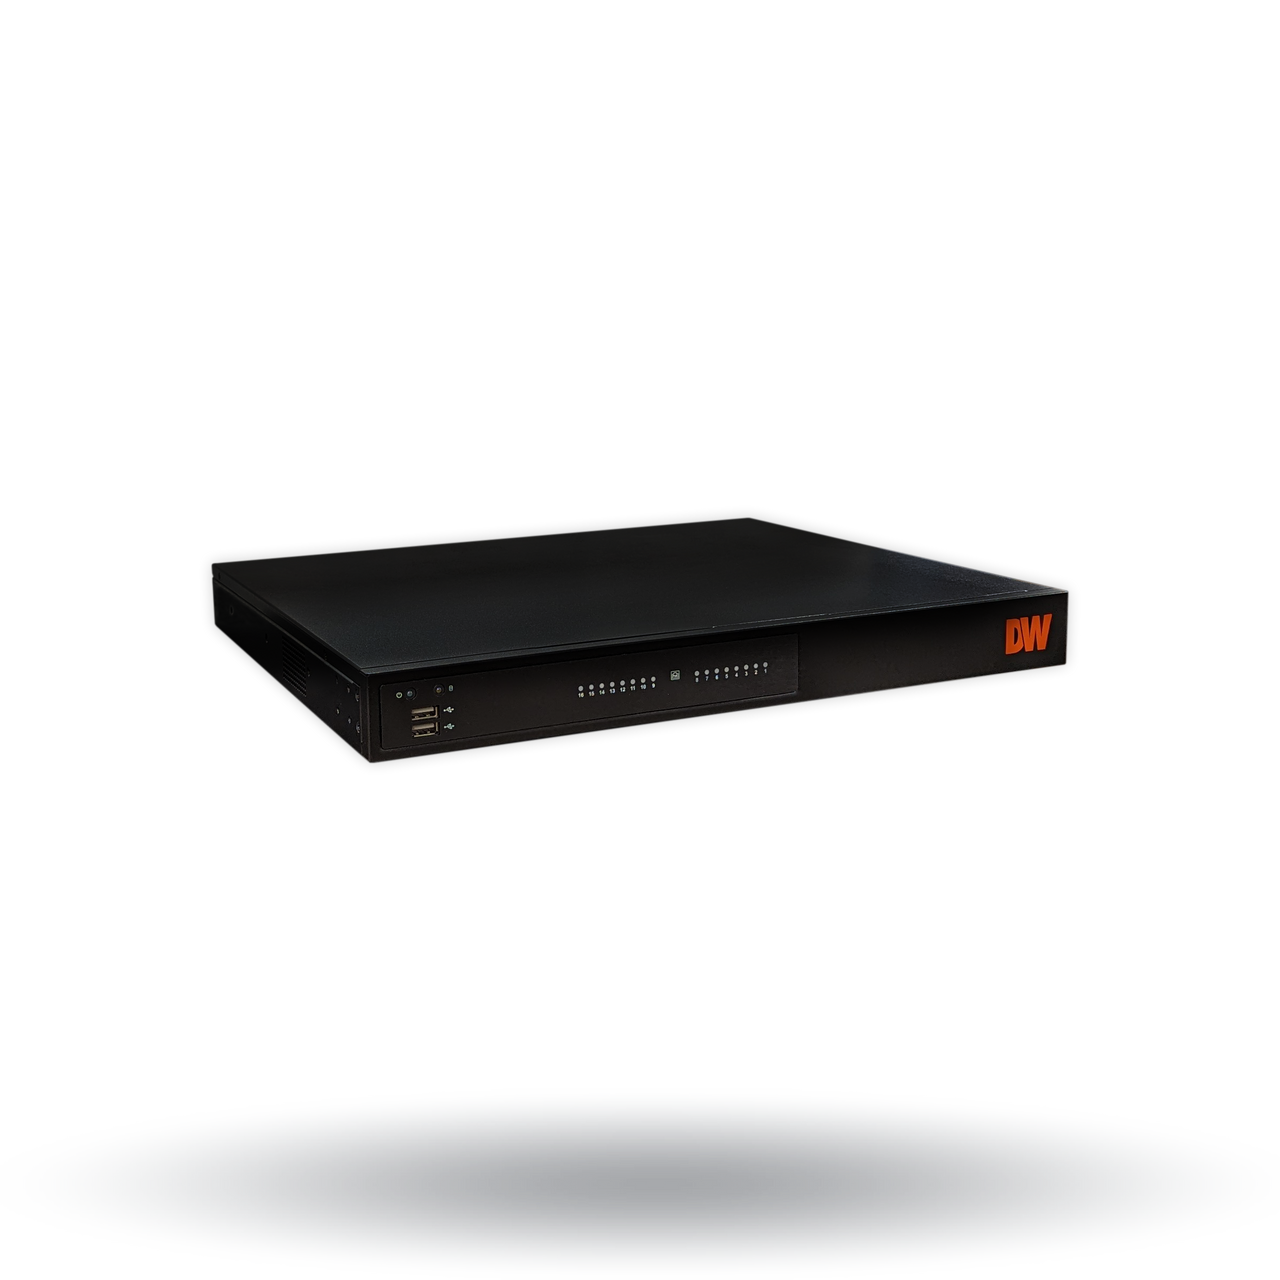 Digital Watchdog DW-BJCX16T-LX 24-Channel 80Mbps NVR with 16 PoE Ports, 16TB HDD